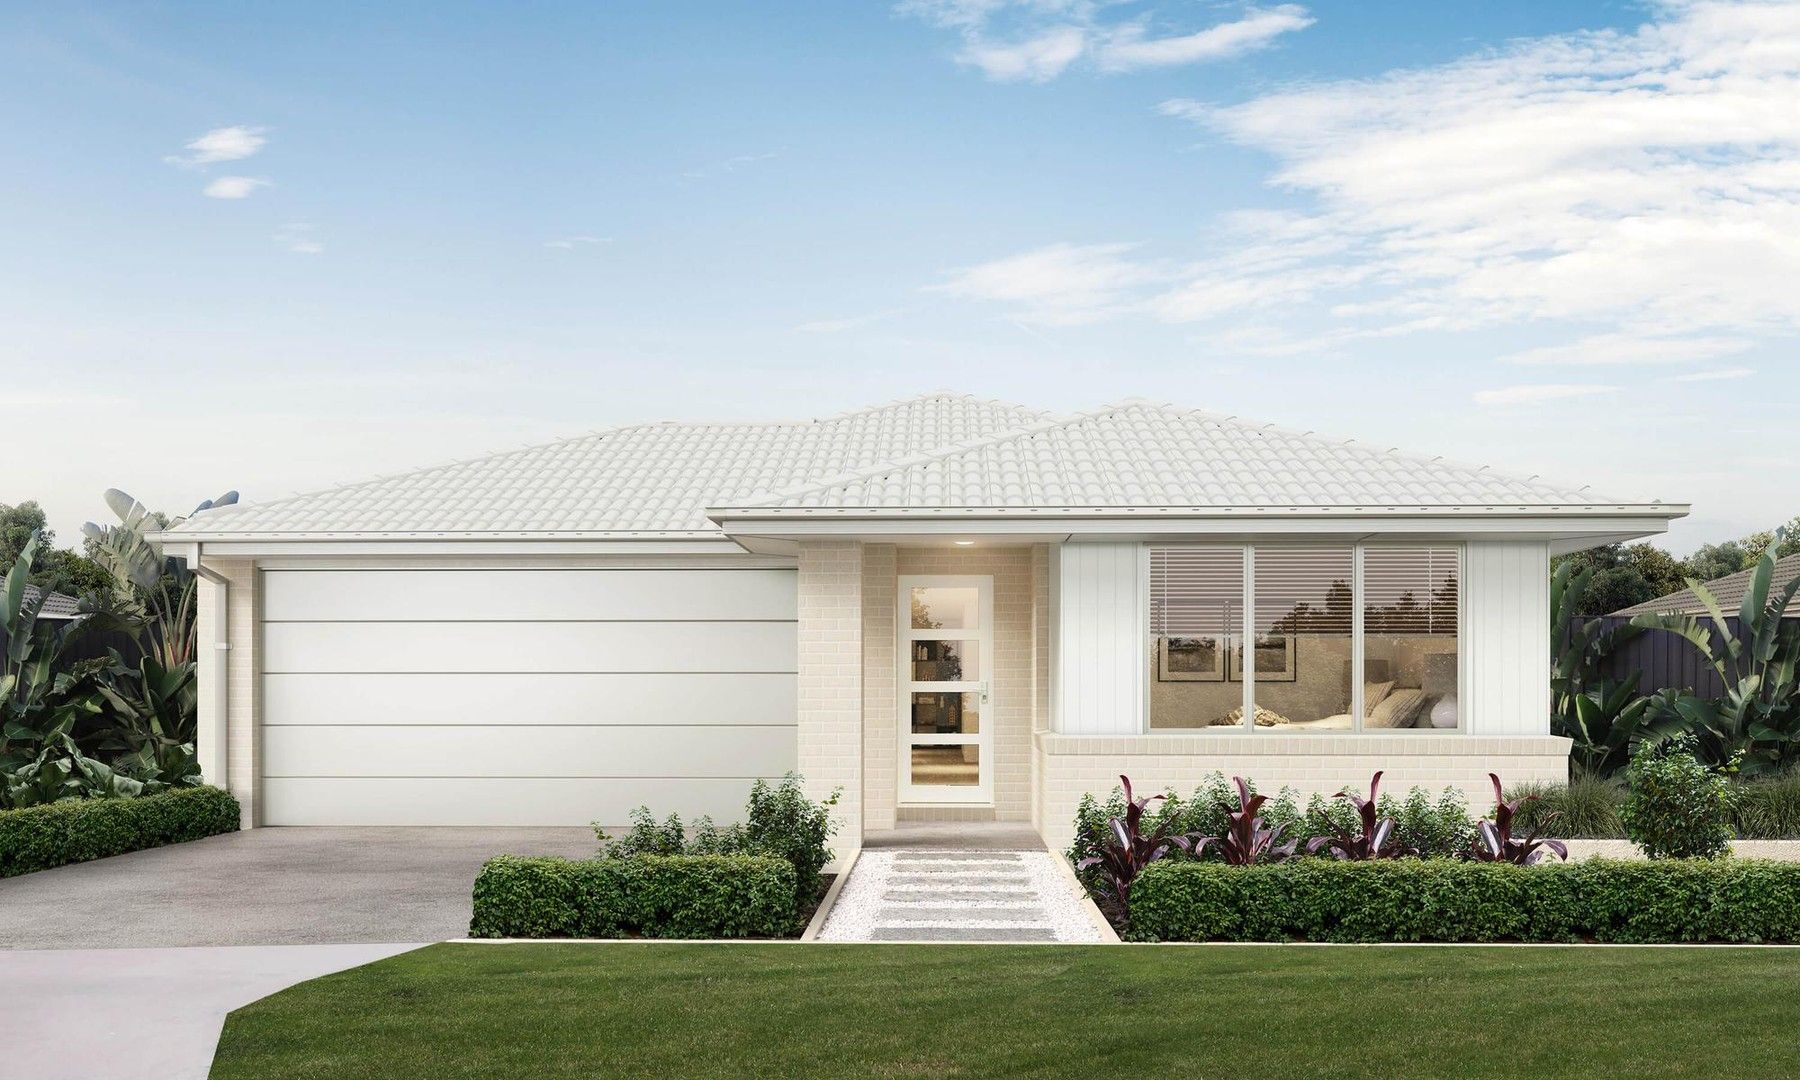 4 bedrooms New House & Land in 11714 Warralily (The Grange) Estate ARMSTRONG CREEK VIC, 3217